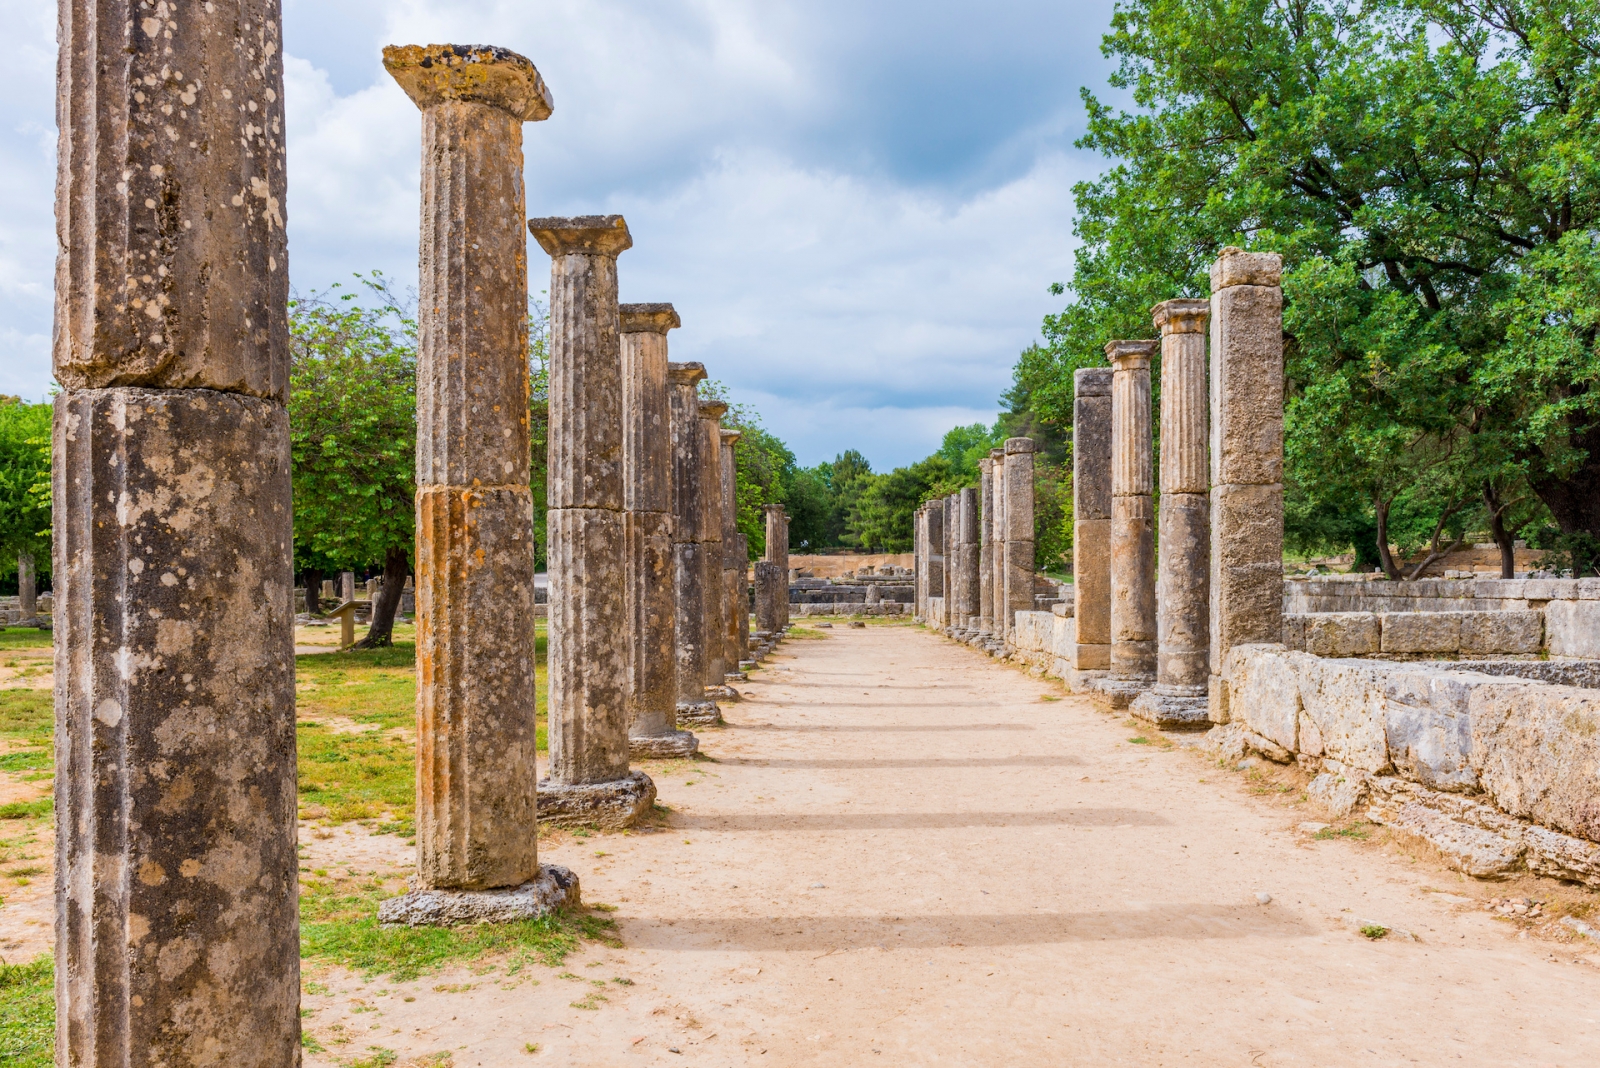 Palaistra (wrestling grounds), ruins of the ancient city of Olympia, Greece